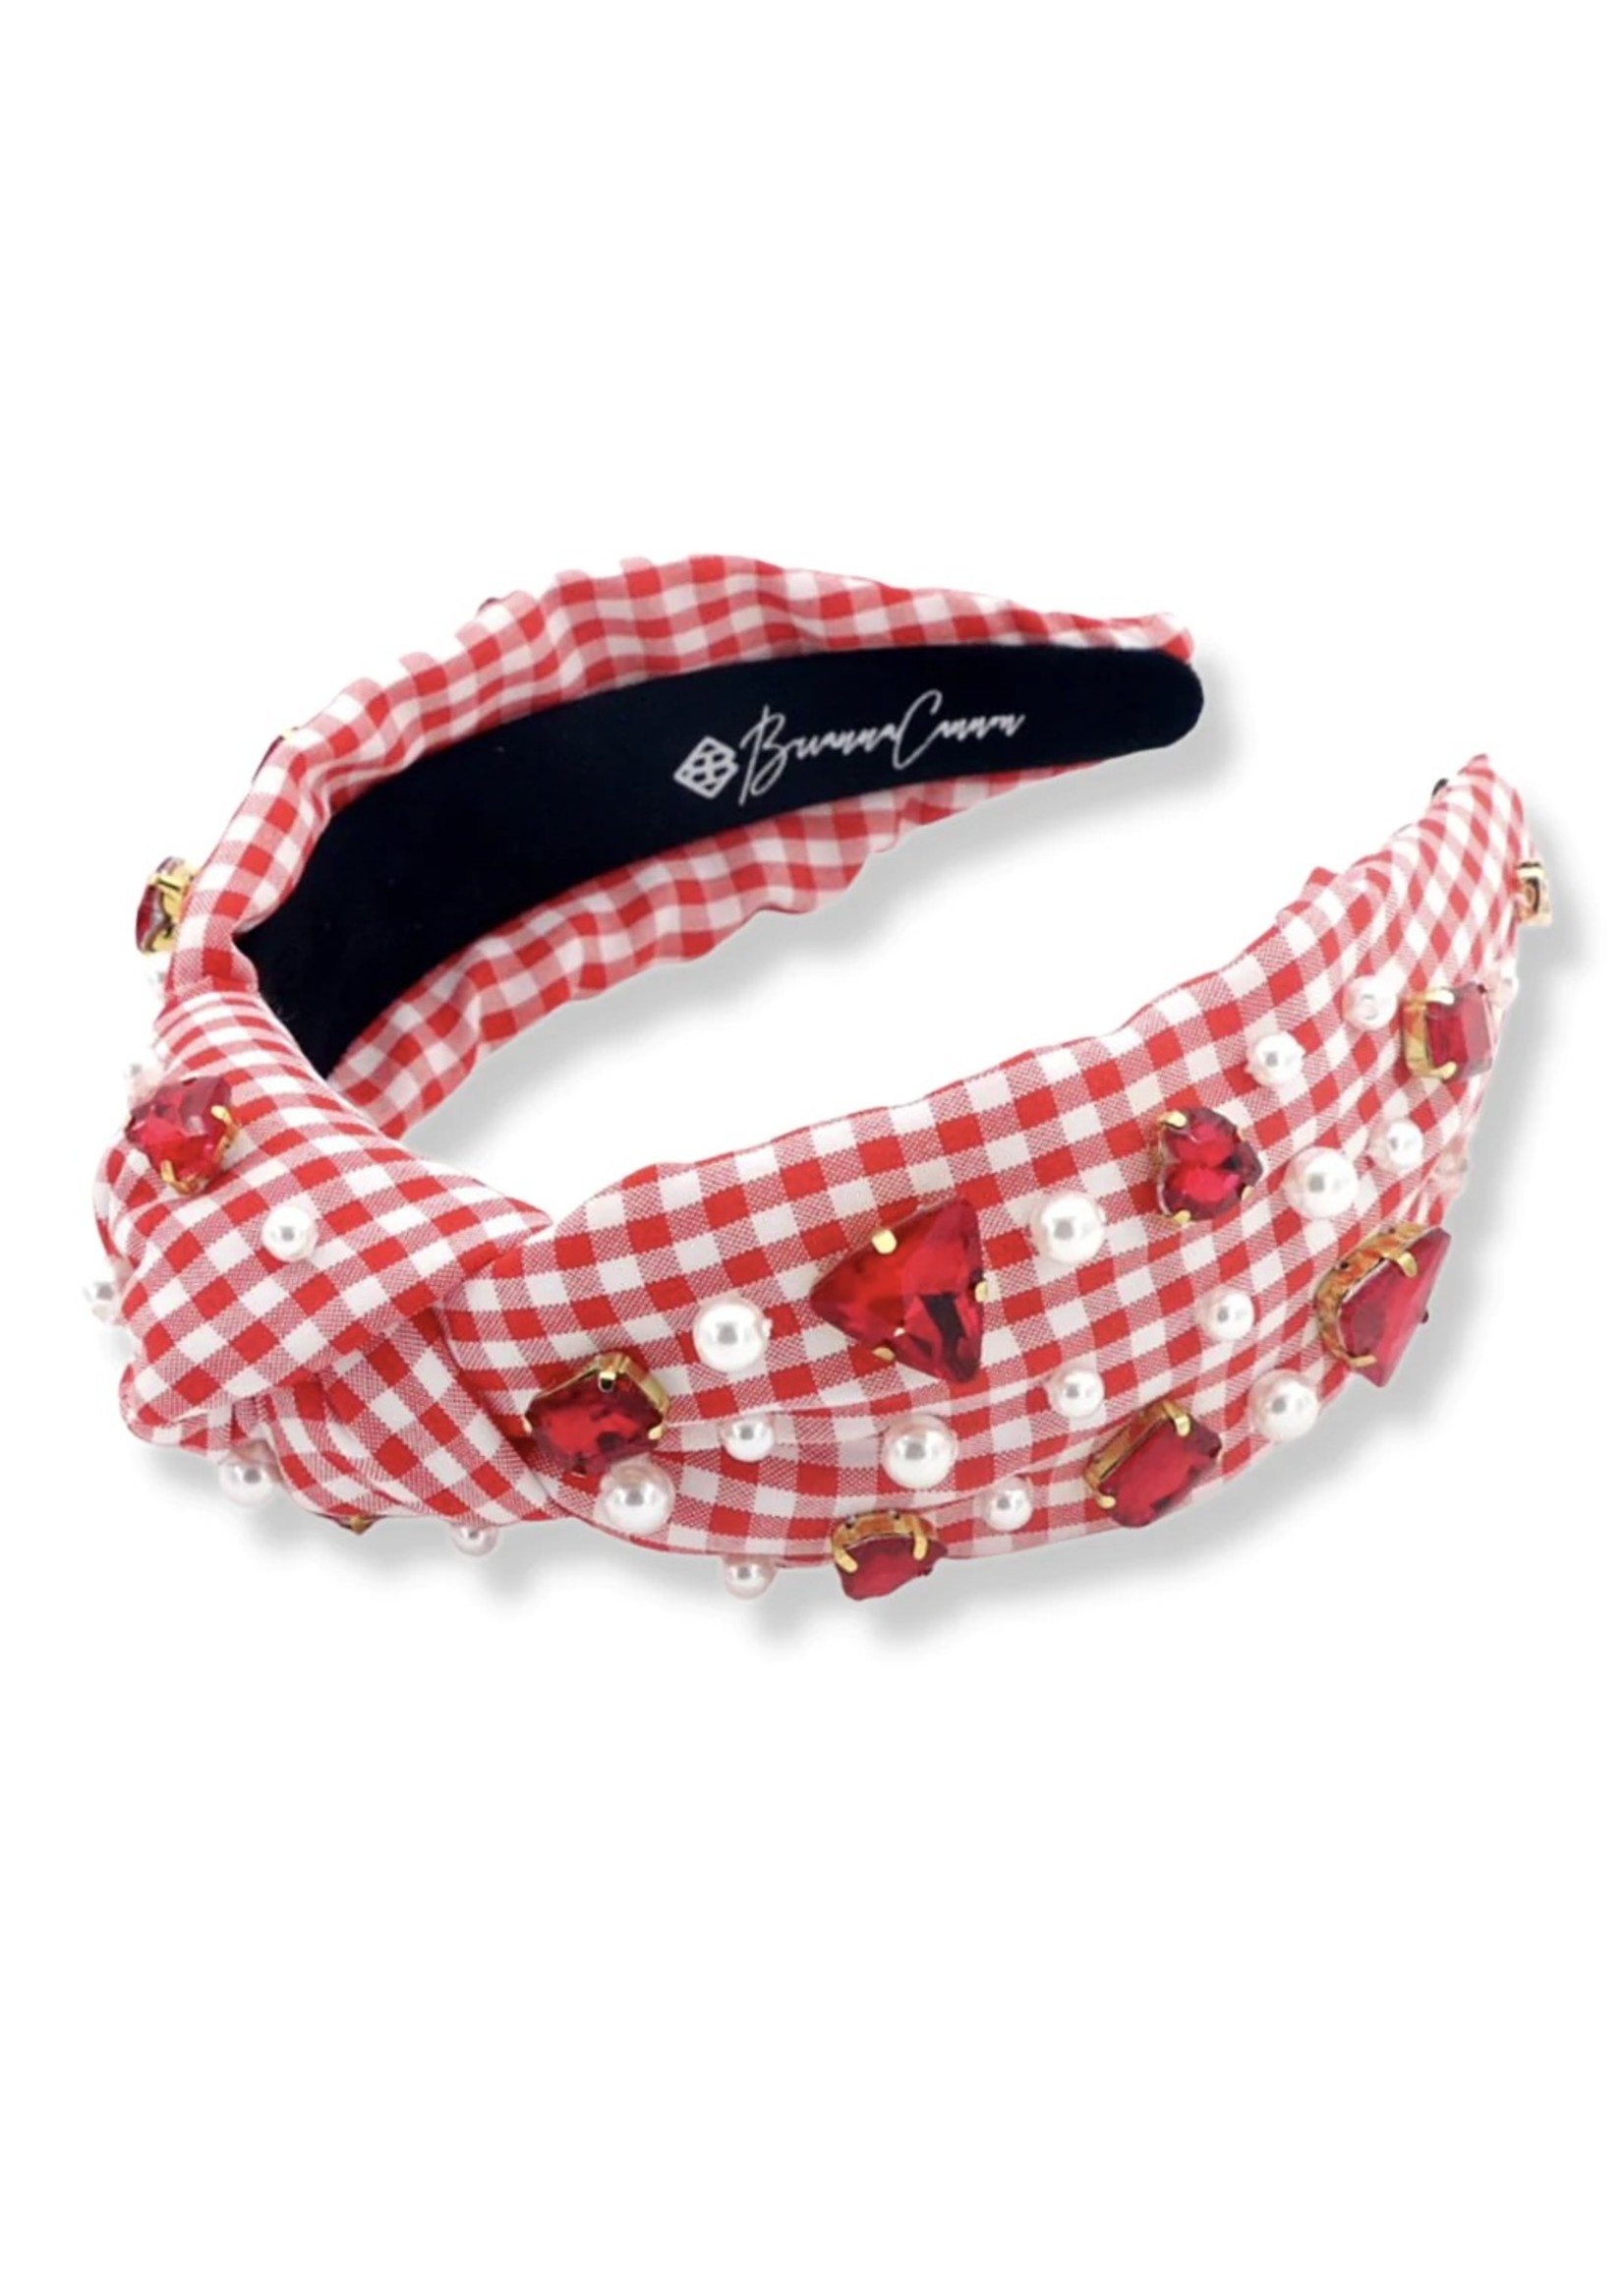 Brianna Cannon Red and White Gingham Headband with Red Heart Crystals and Pearls